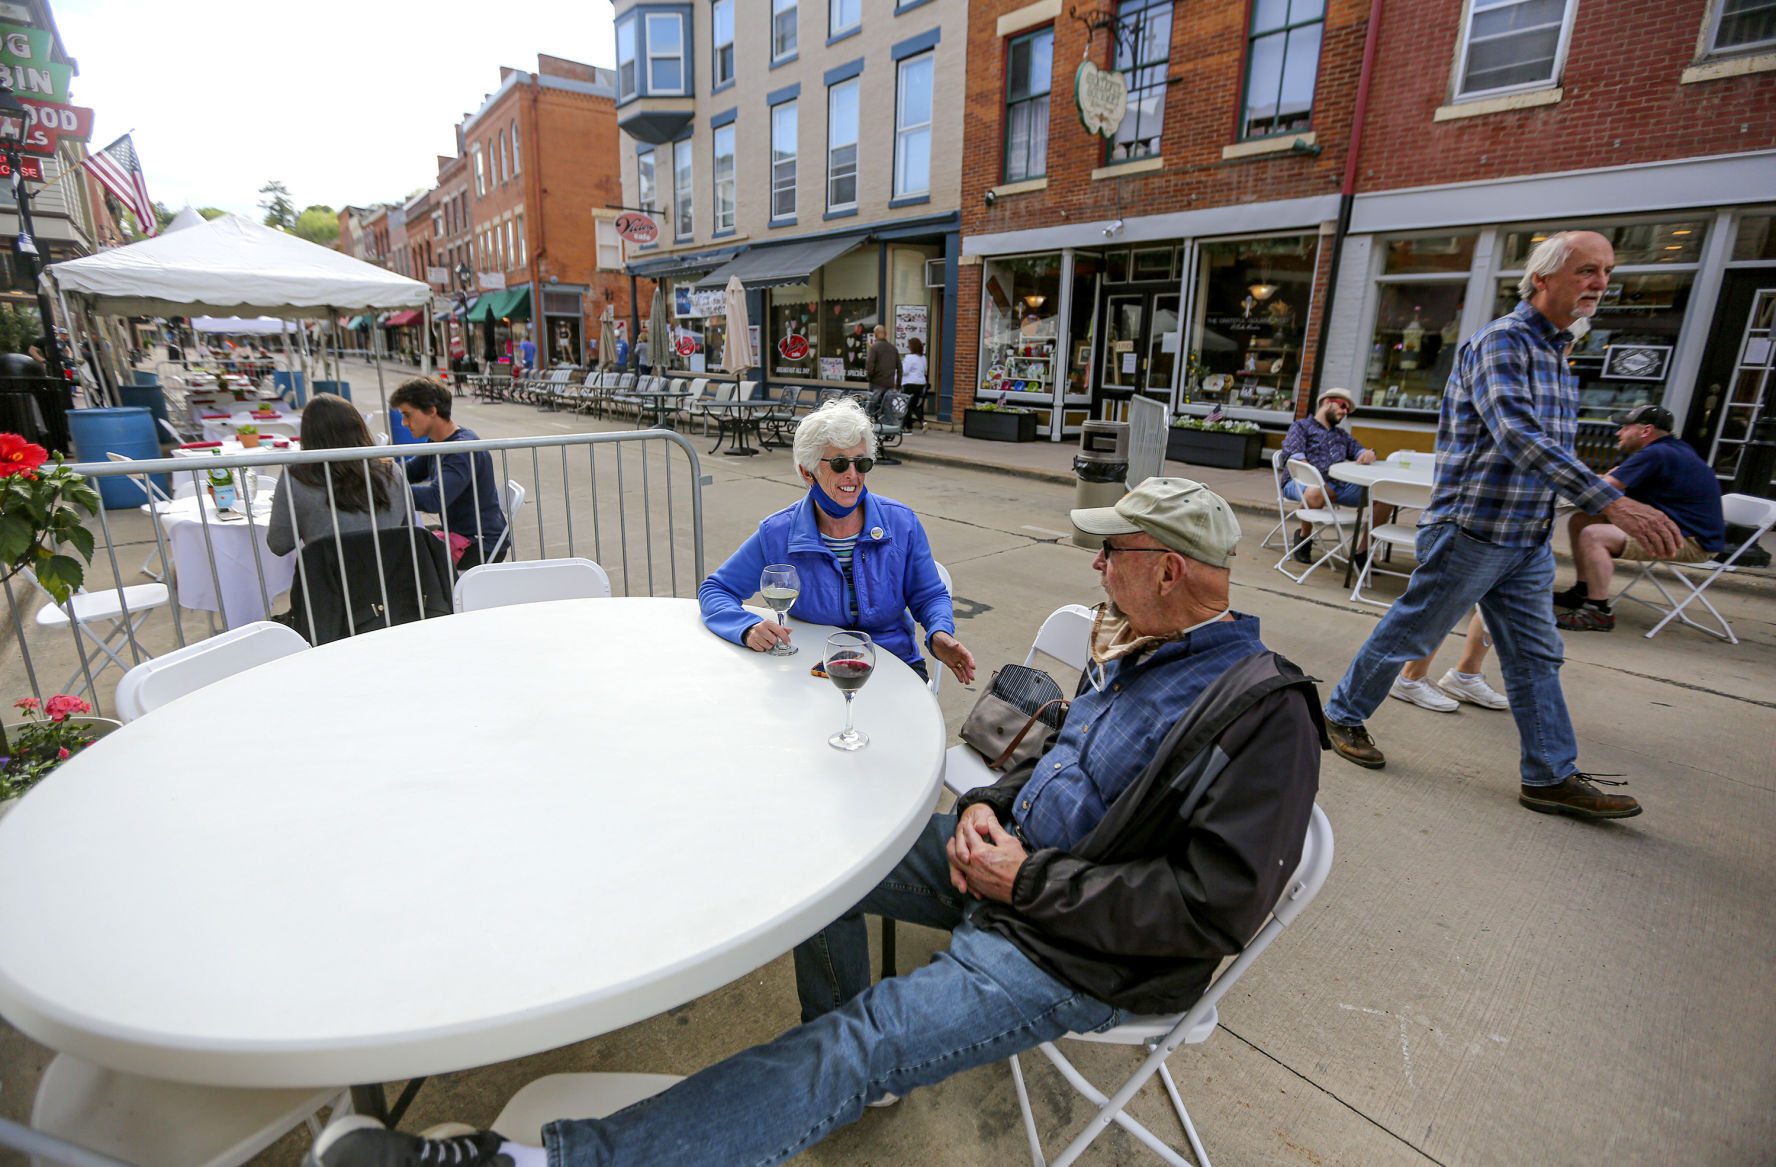 Ruth Feece and her husband, Darrell, of Galena, Ill., enjoy a glass of wine at Paradise Bar and Grill on Galena’s Main Street in May. The city closed parts of Main Street last year to allow businesses to provide outdoor seating for their customers, and a similar plan is in place for 2021. PHOTO CREDIT: Dave Kettering, Telegraph Herald